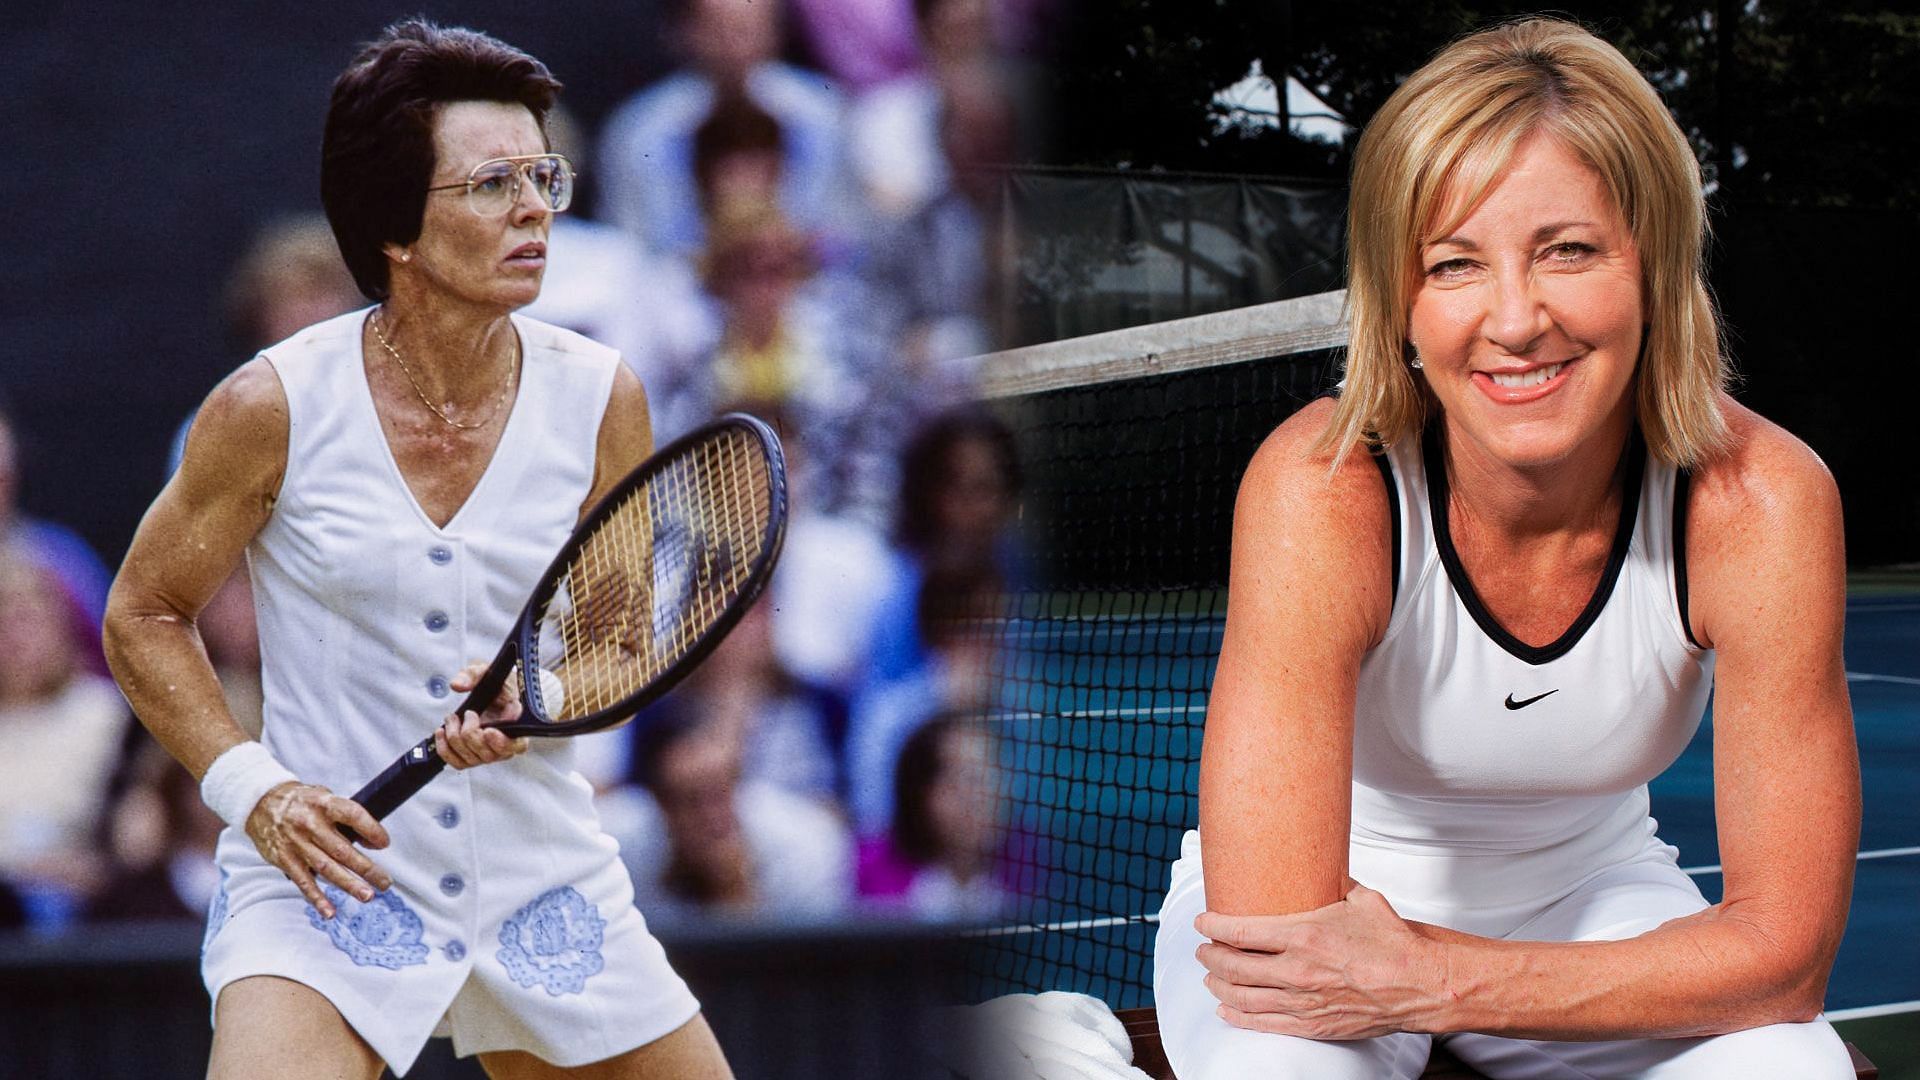 Billie Jean King supported Chris Evert during her initial years